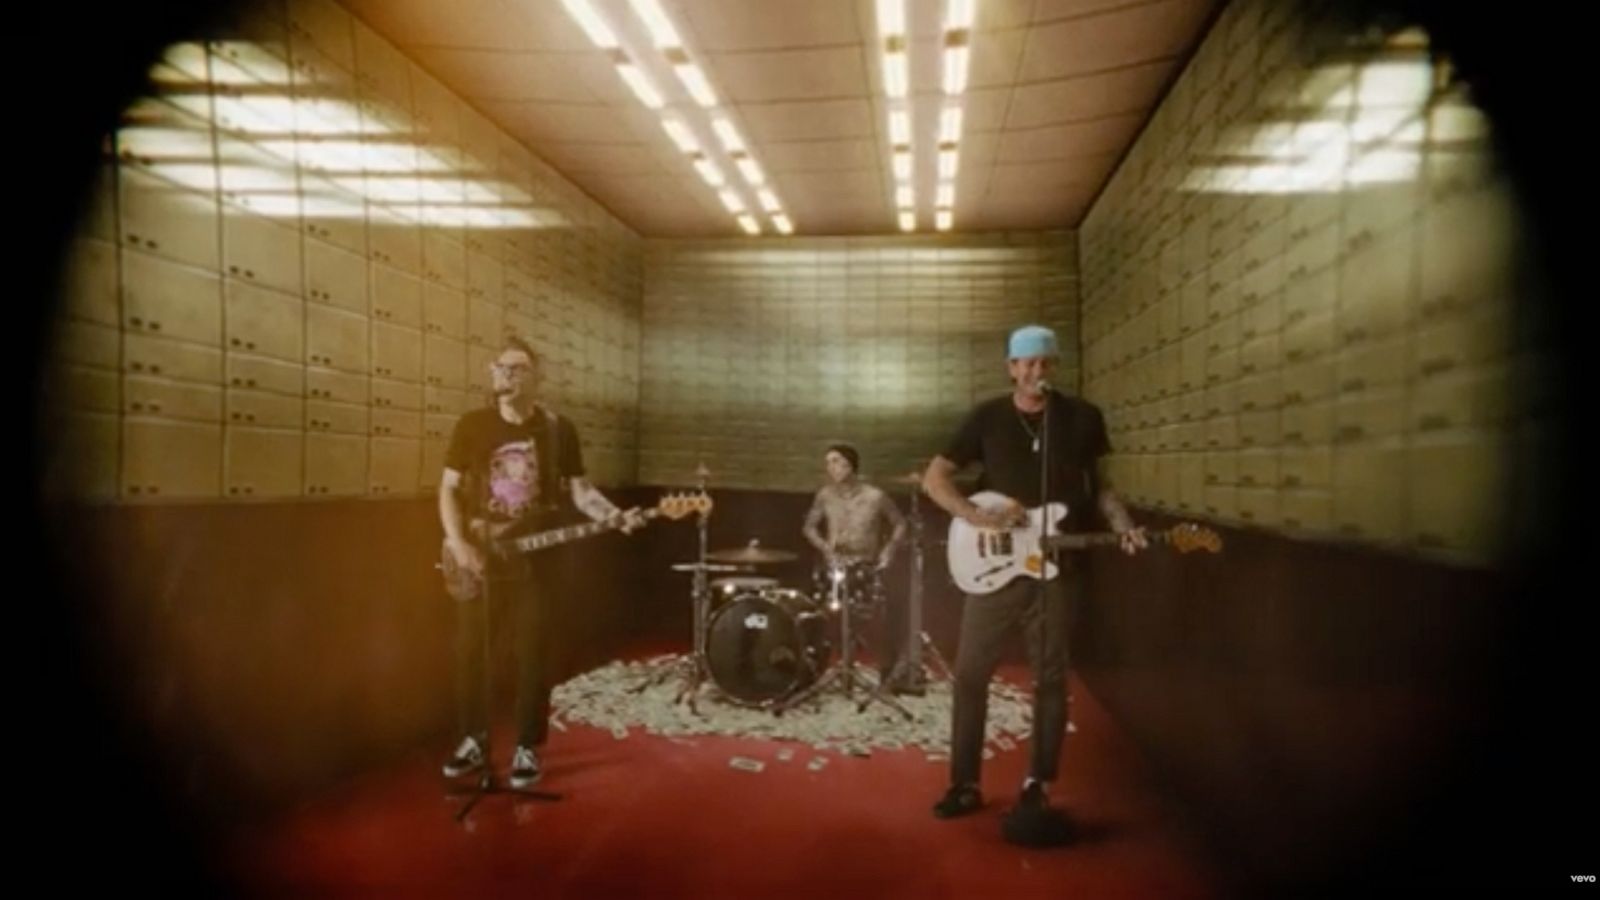 Blink-182 releases emotional music video for new song ONE MORE TIME